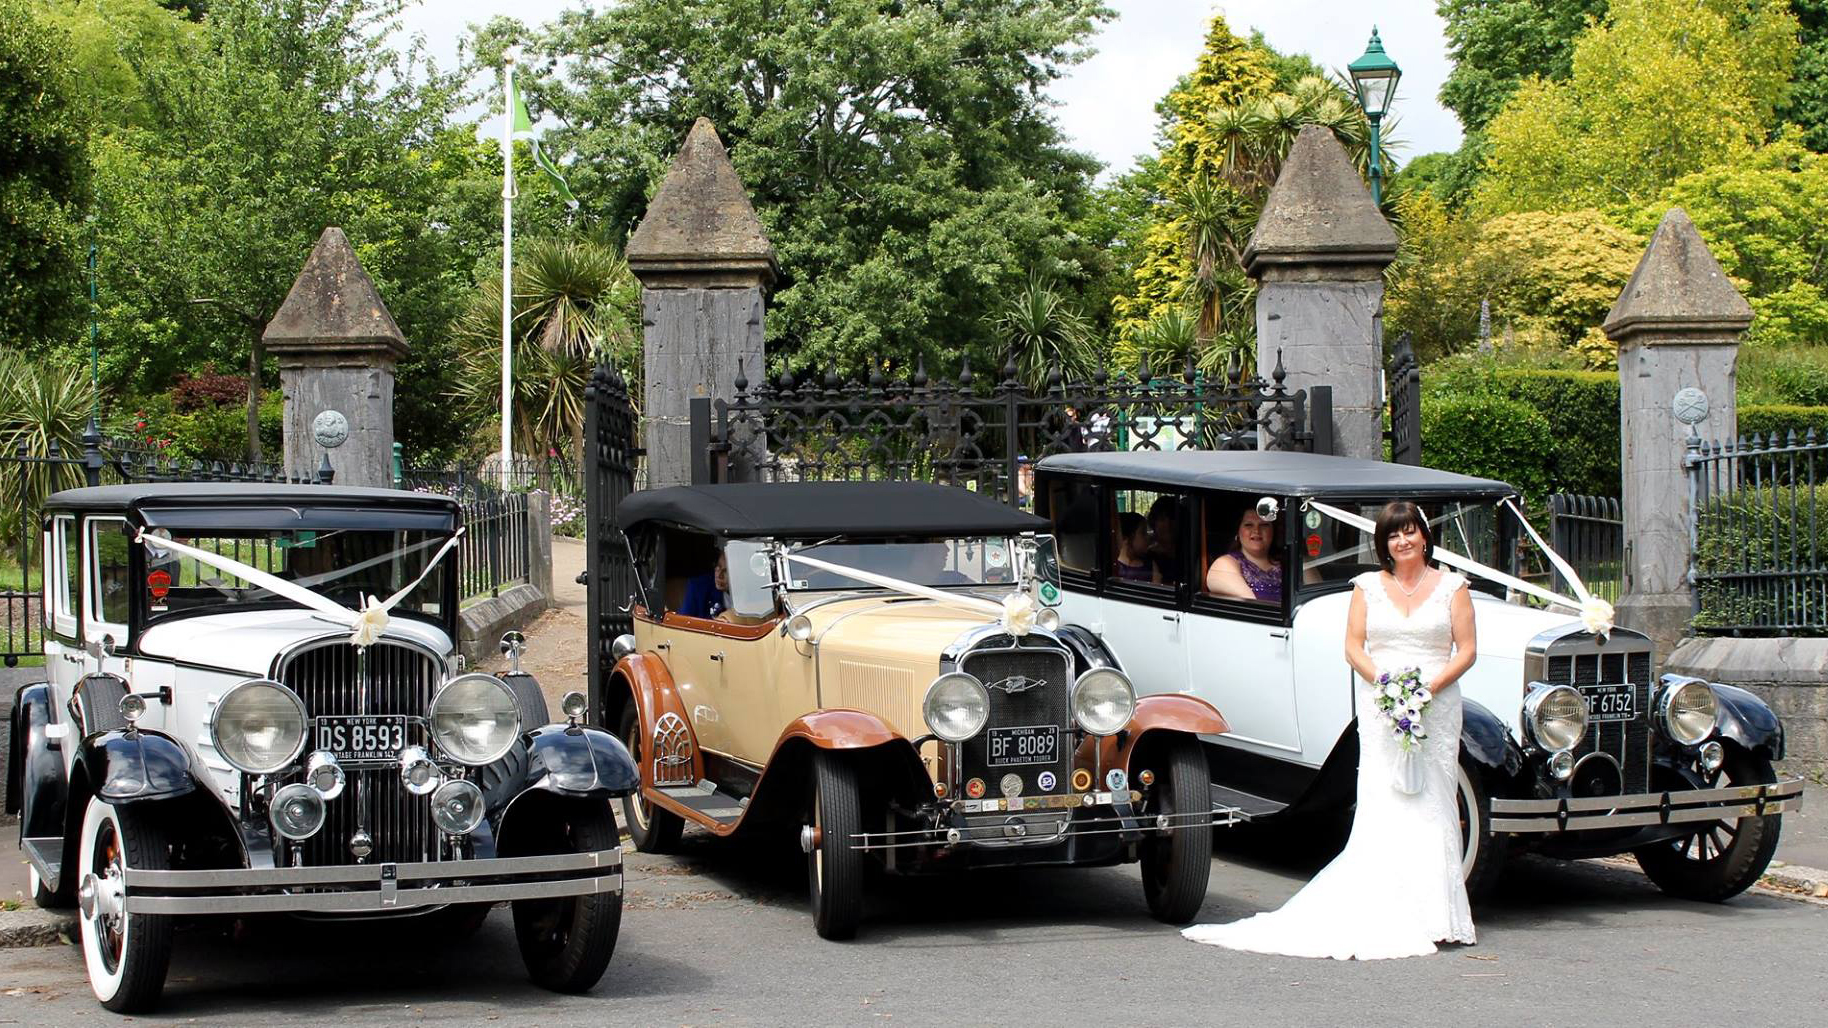 Three vintage wedding cars decorated with white ribbons at a local Barnstaple wedding. All three vehicles are parked side-by-side with bride wearing a white dress holding a bridal 